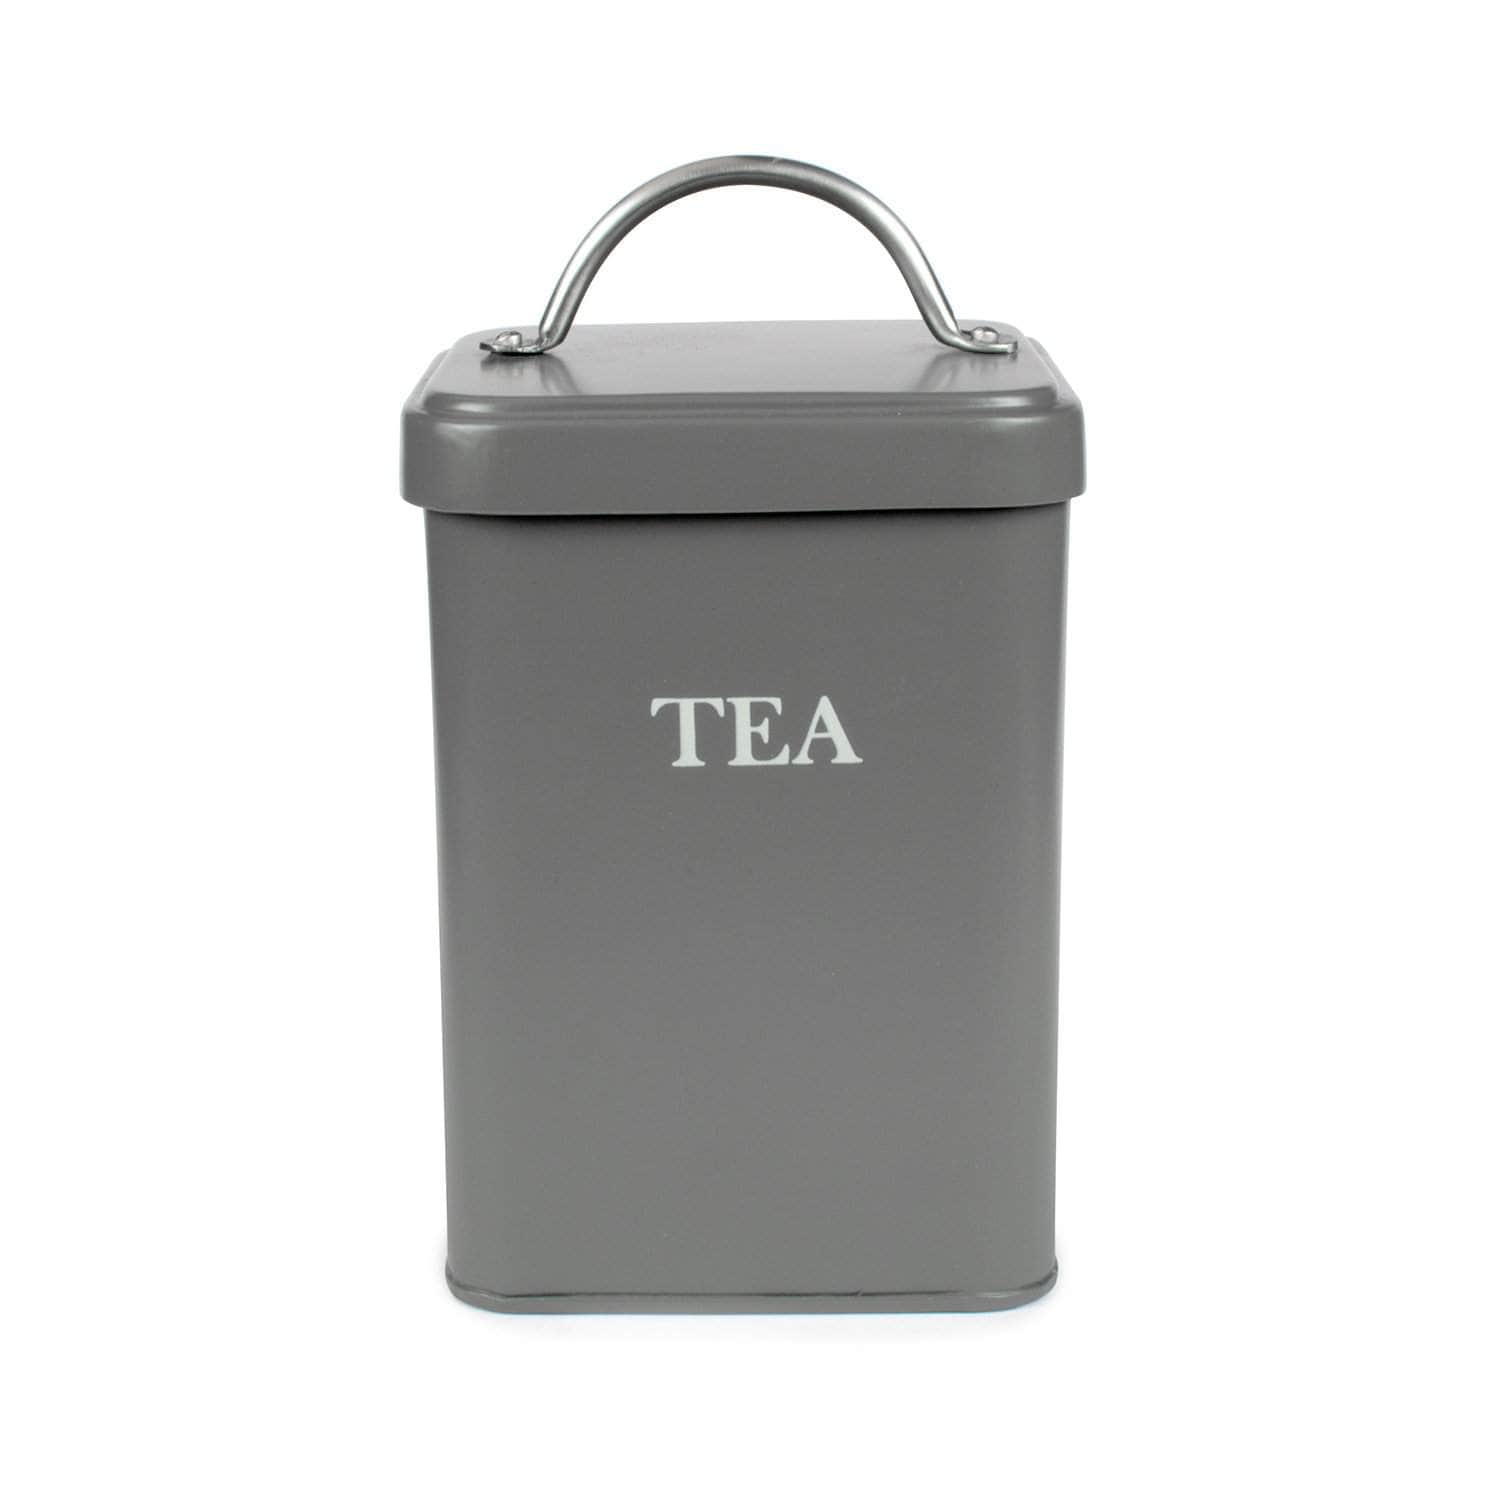 Tea canister in charcoal